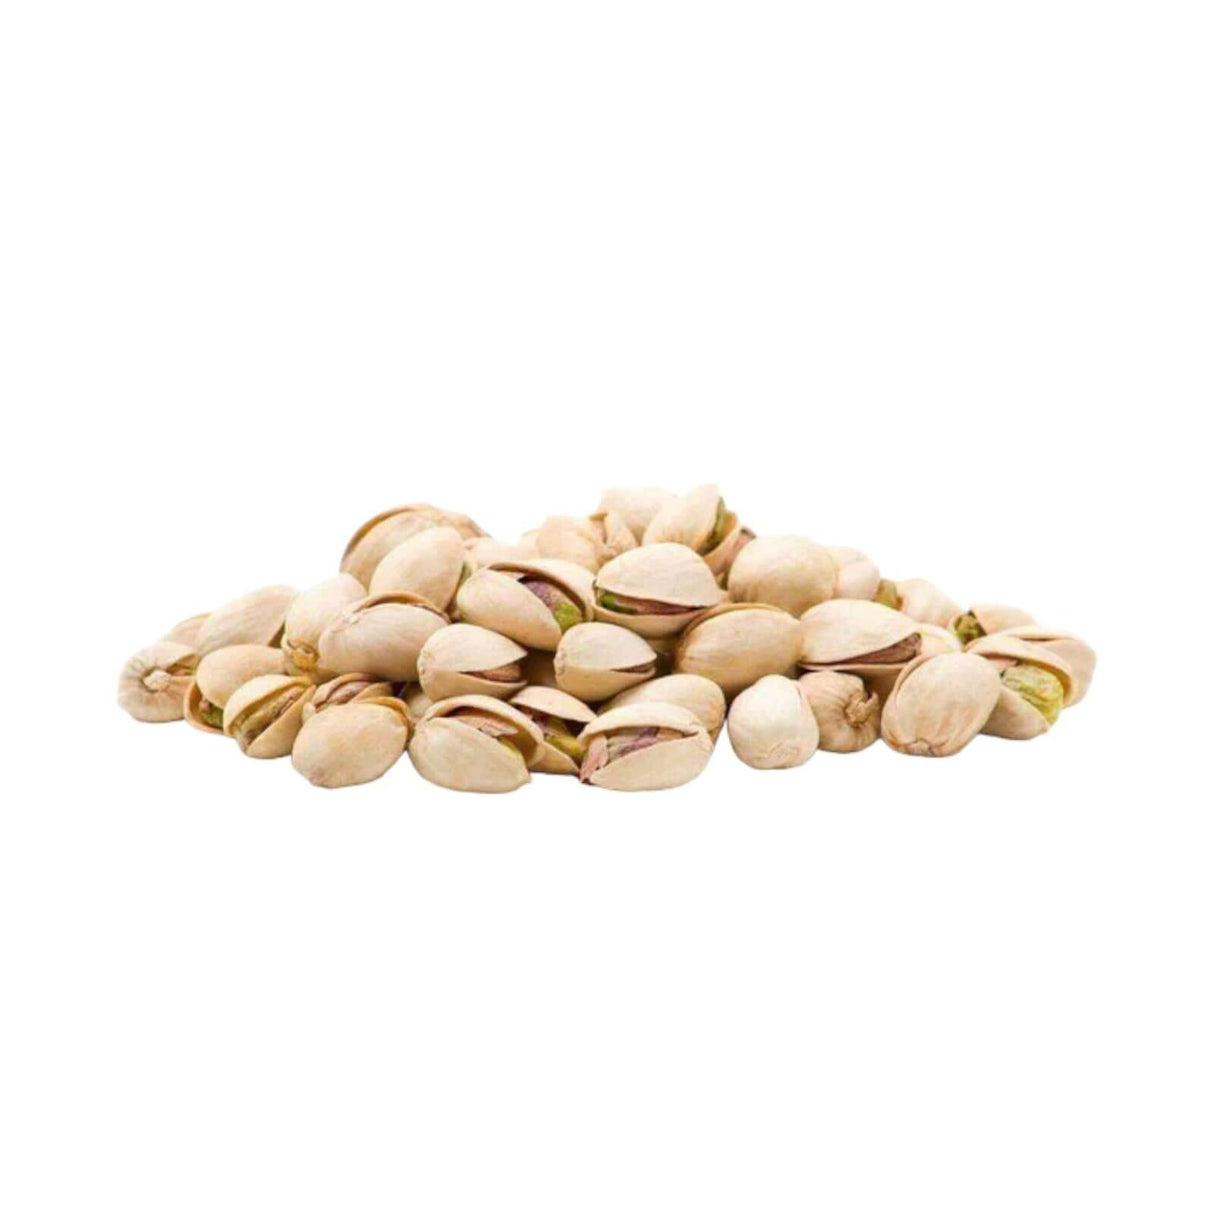 Unsalted Roasted Pistachios